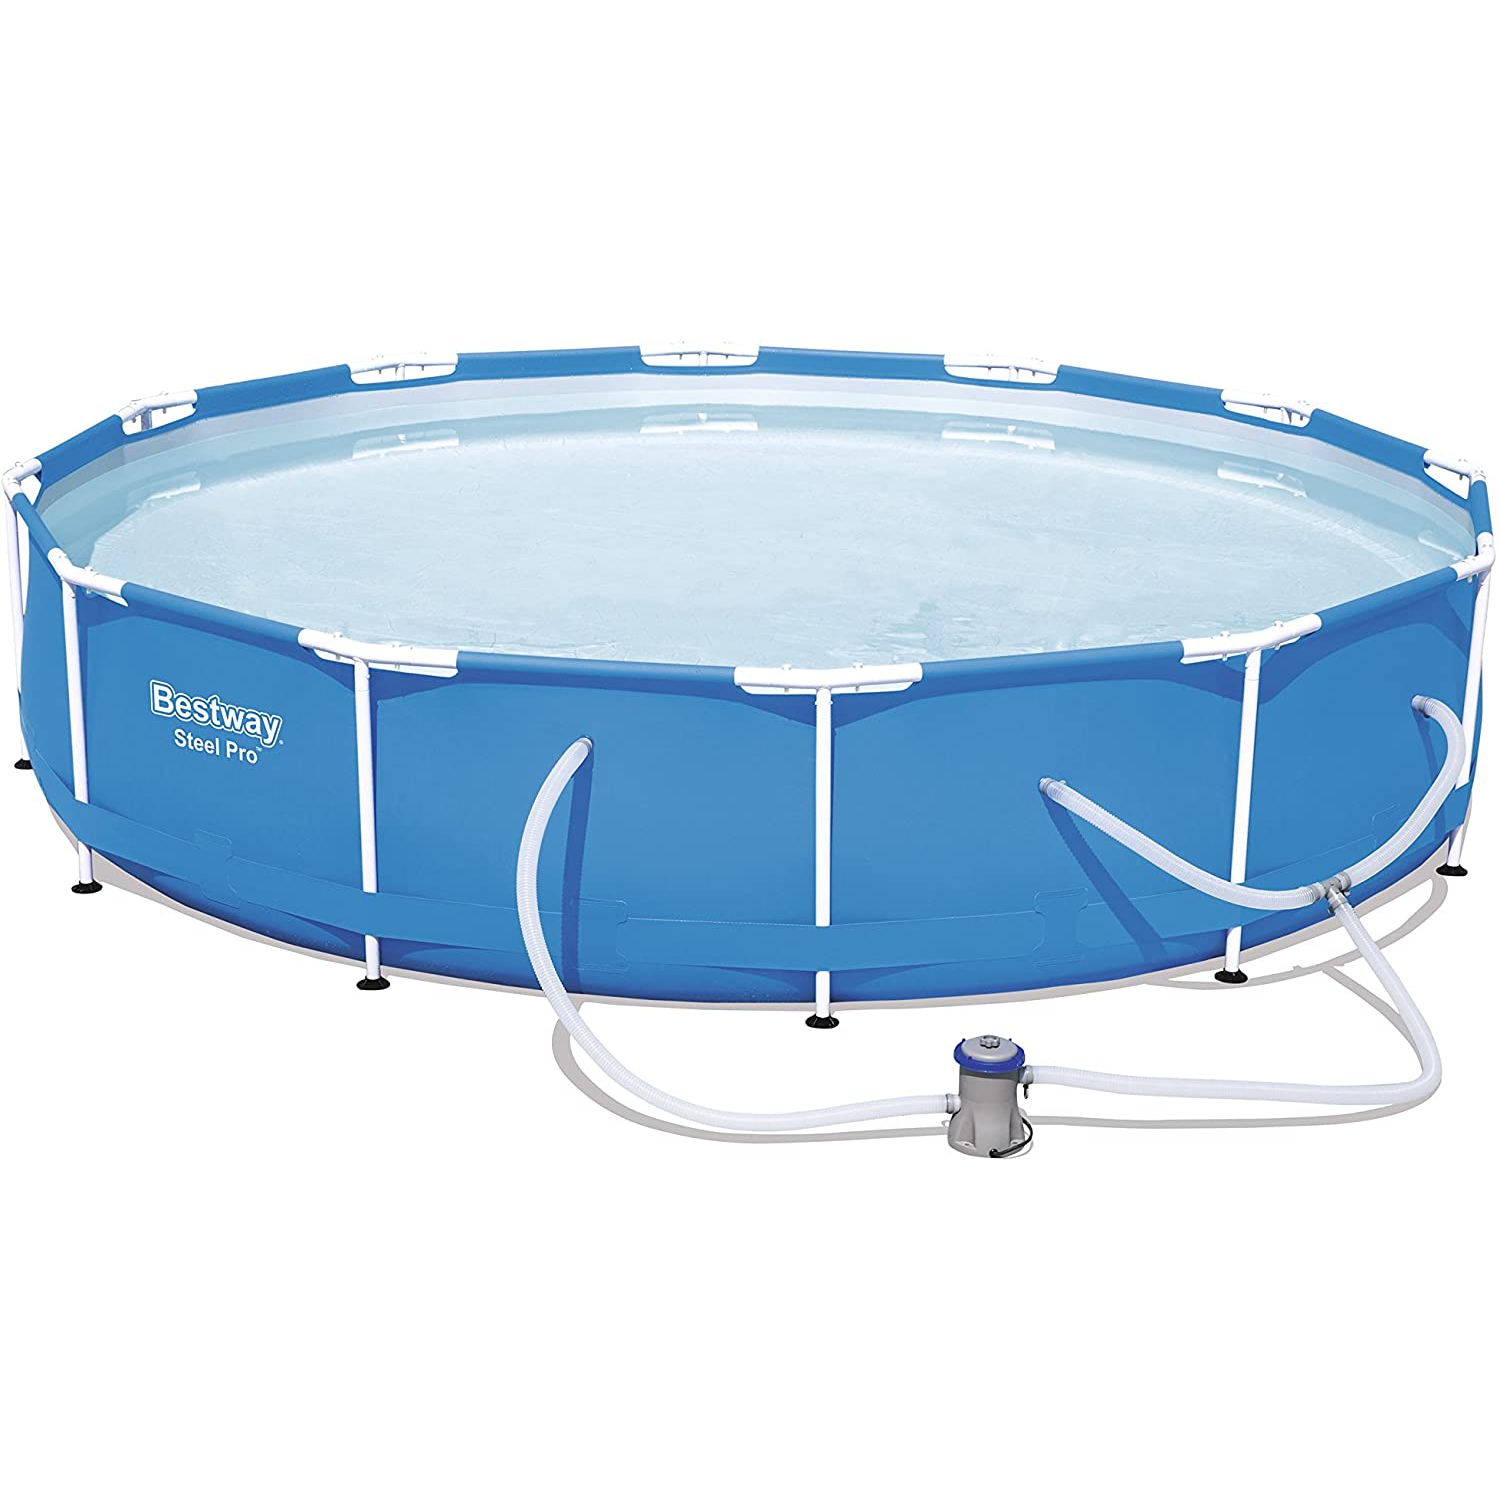 Bestway Steel Pro 10'ft x 30"inch Frame Pool Set Above Ground durable Performance Corrosion&Puncture Resistant Construction including filter and pump with 4,678 gal water capacity